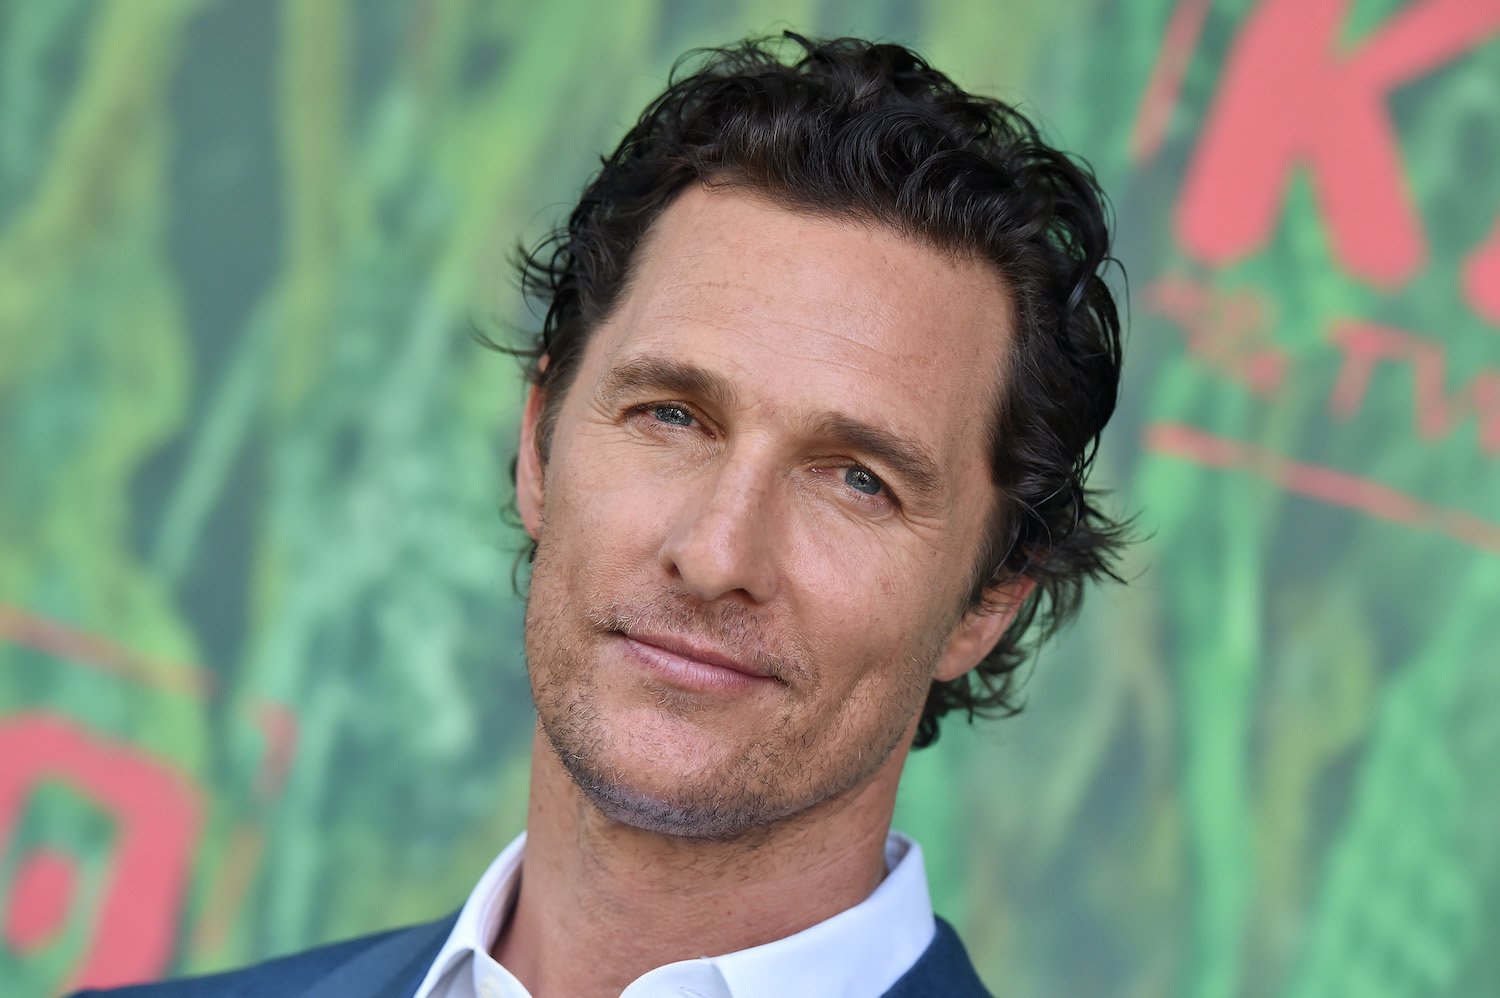 Matthew McConaughey arrives at the premiere of 'Kubo And The Two Strings' on August 14, 2016